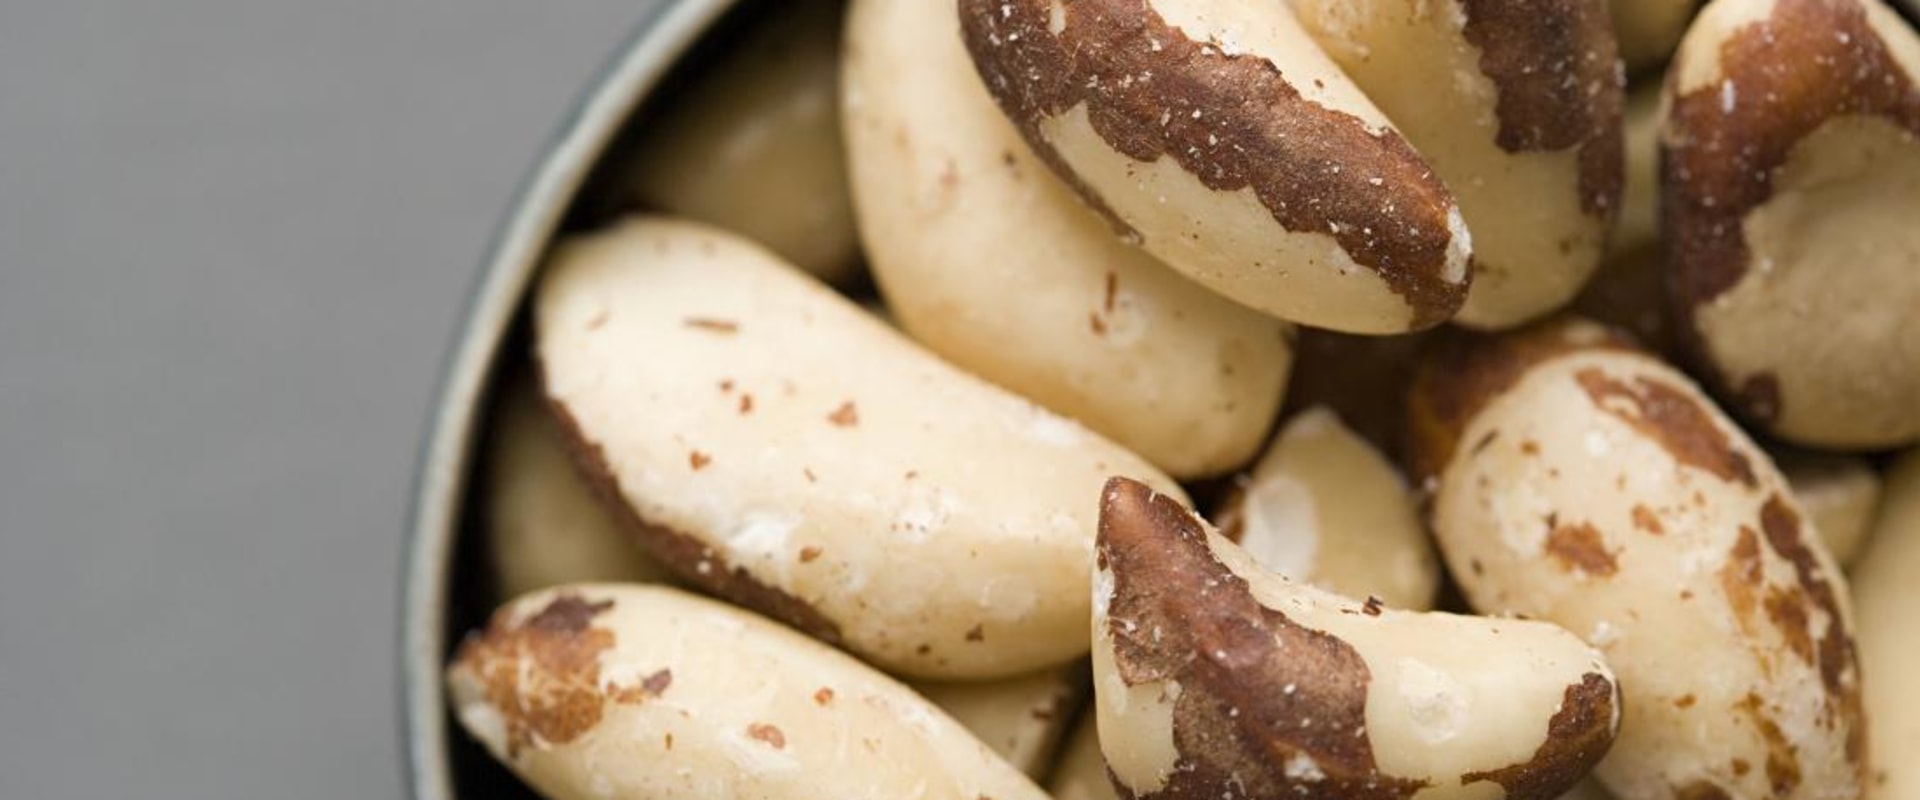 Can brazil nuts be grown in usa?